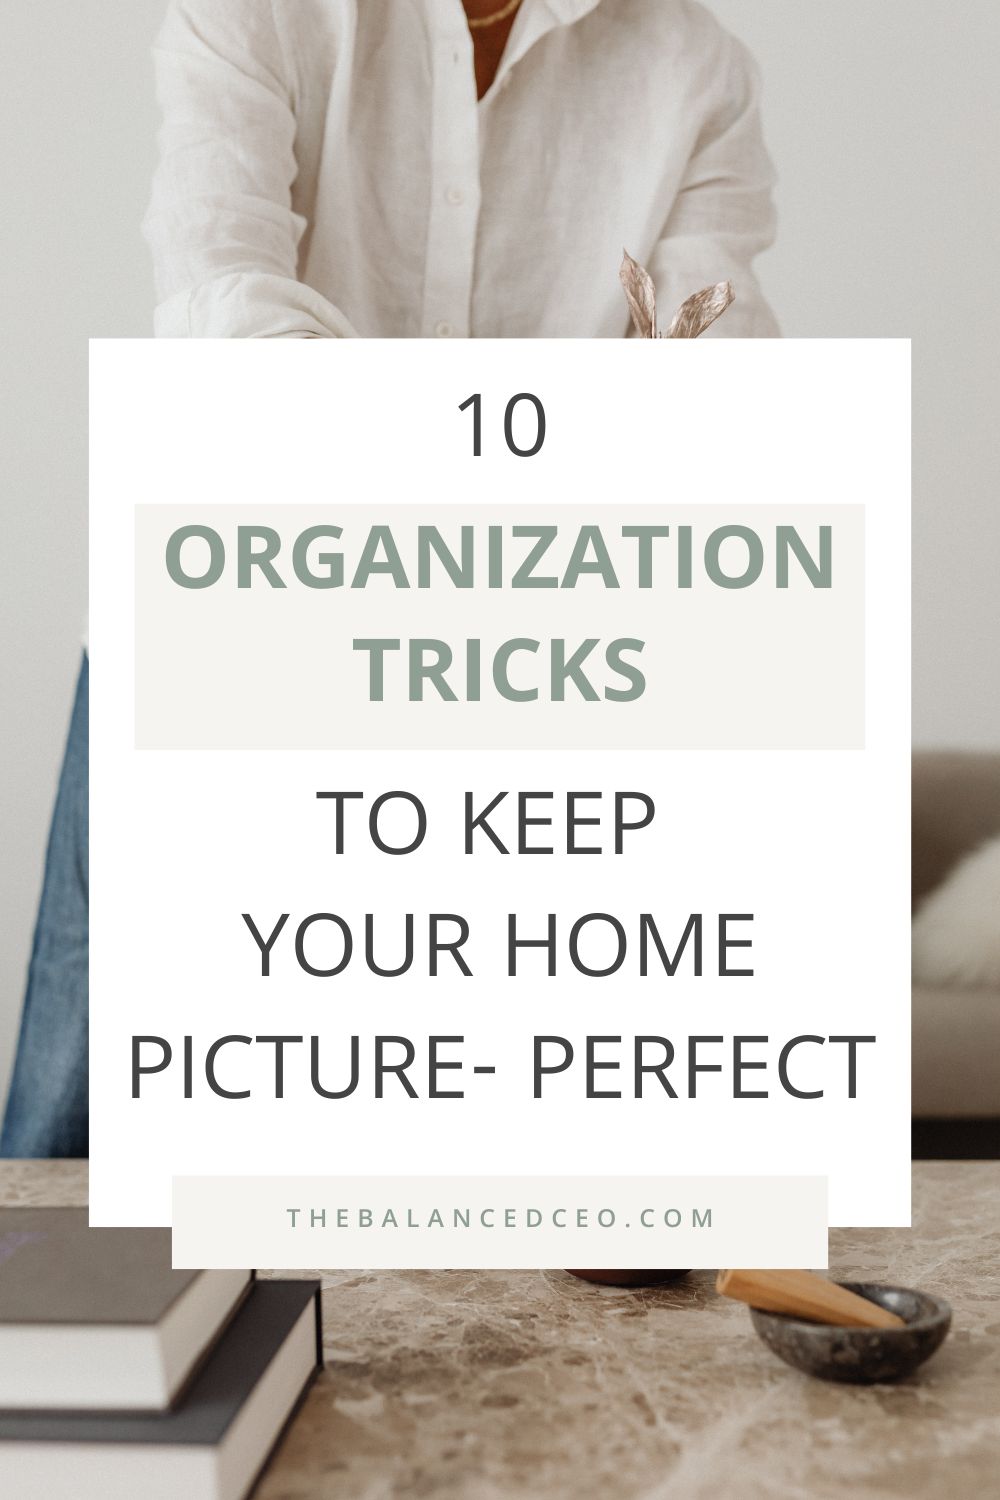 10 Organization Tricks to Keep Your Home Picture-Perfect